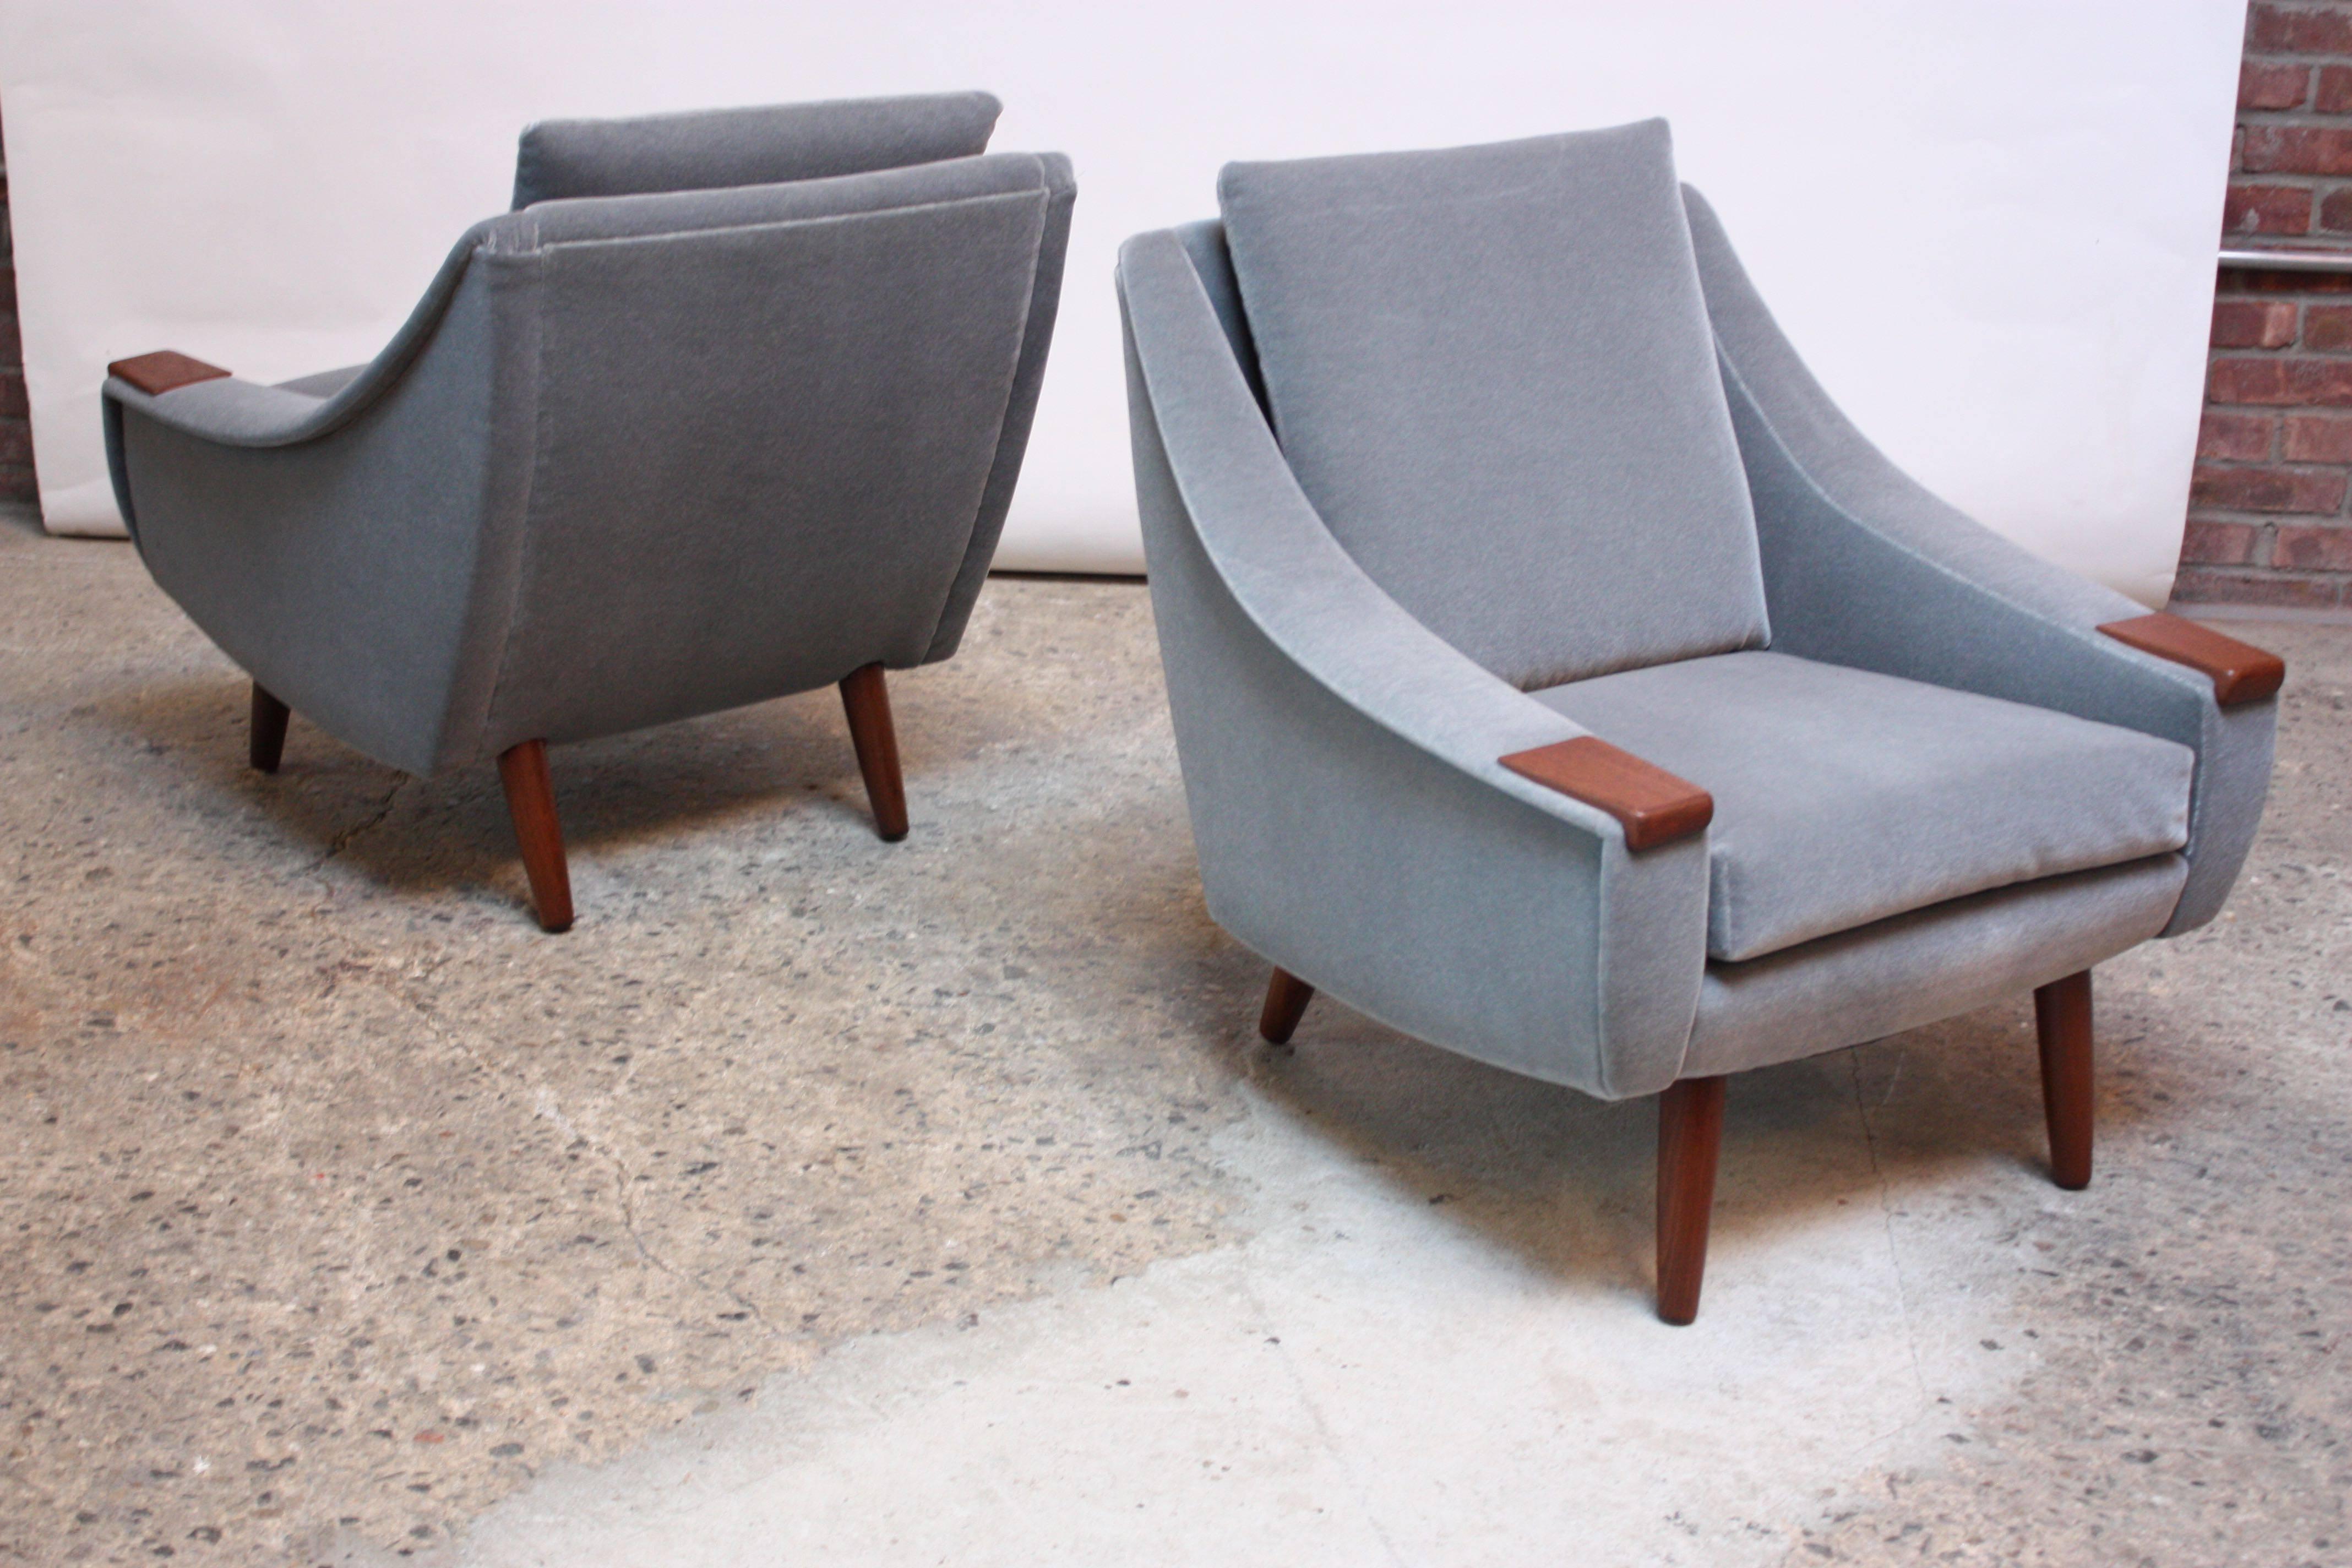 Pair of 1960s Danish lounge chairs newly upholstered in a powder blue mohair with teak armrests raised on turned teak legs. Elegant, clean lines and lovely teak grain.
Height to the top of the frame is: 29" (the back cushion increases the